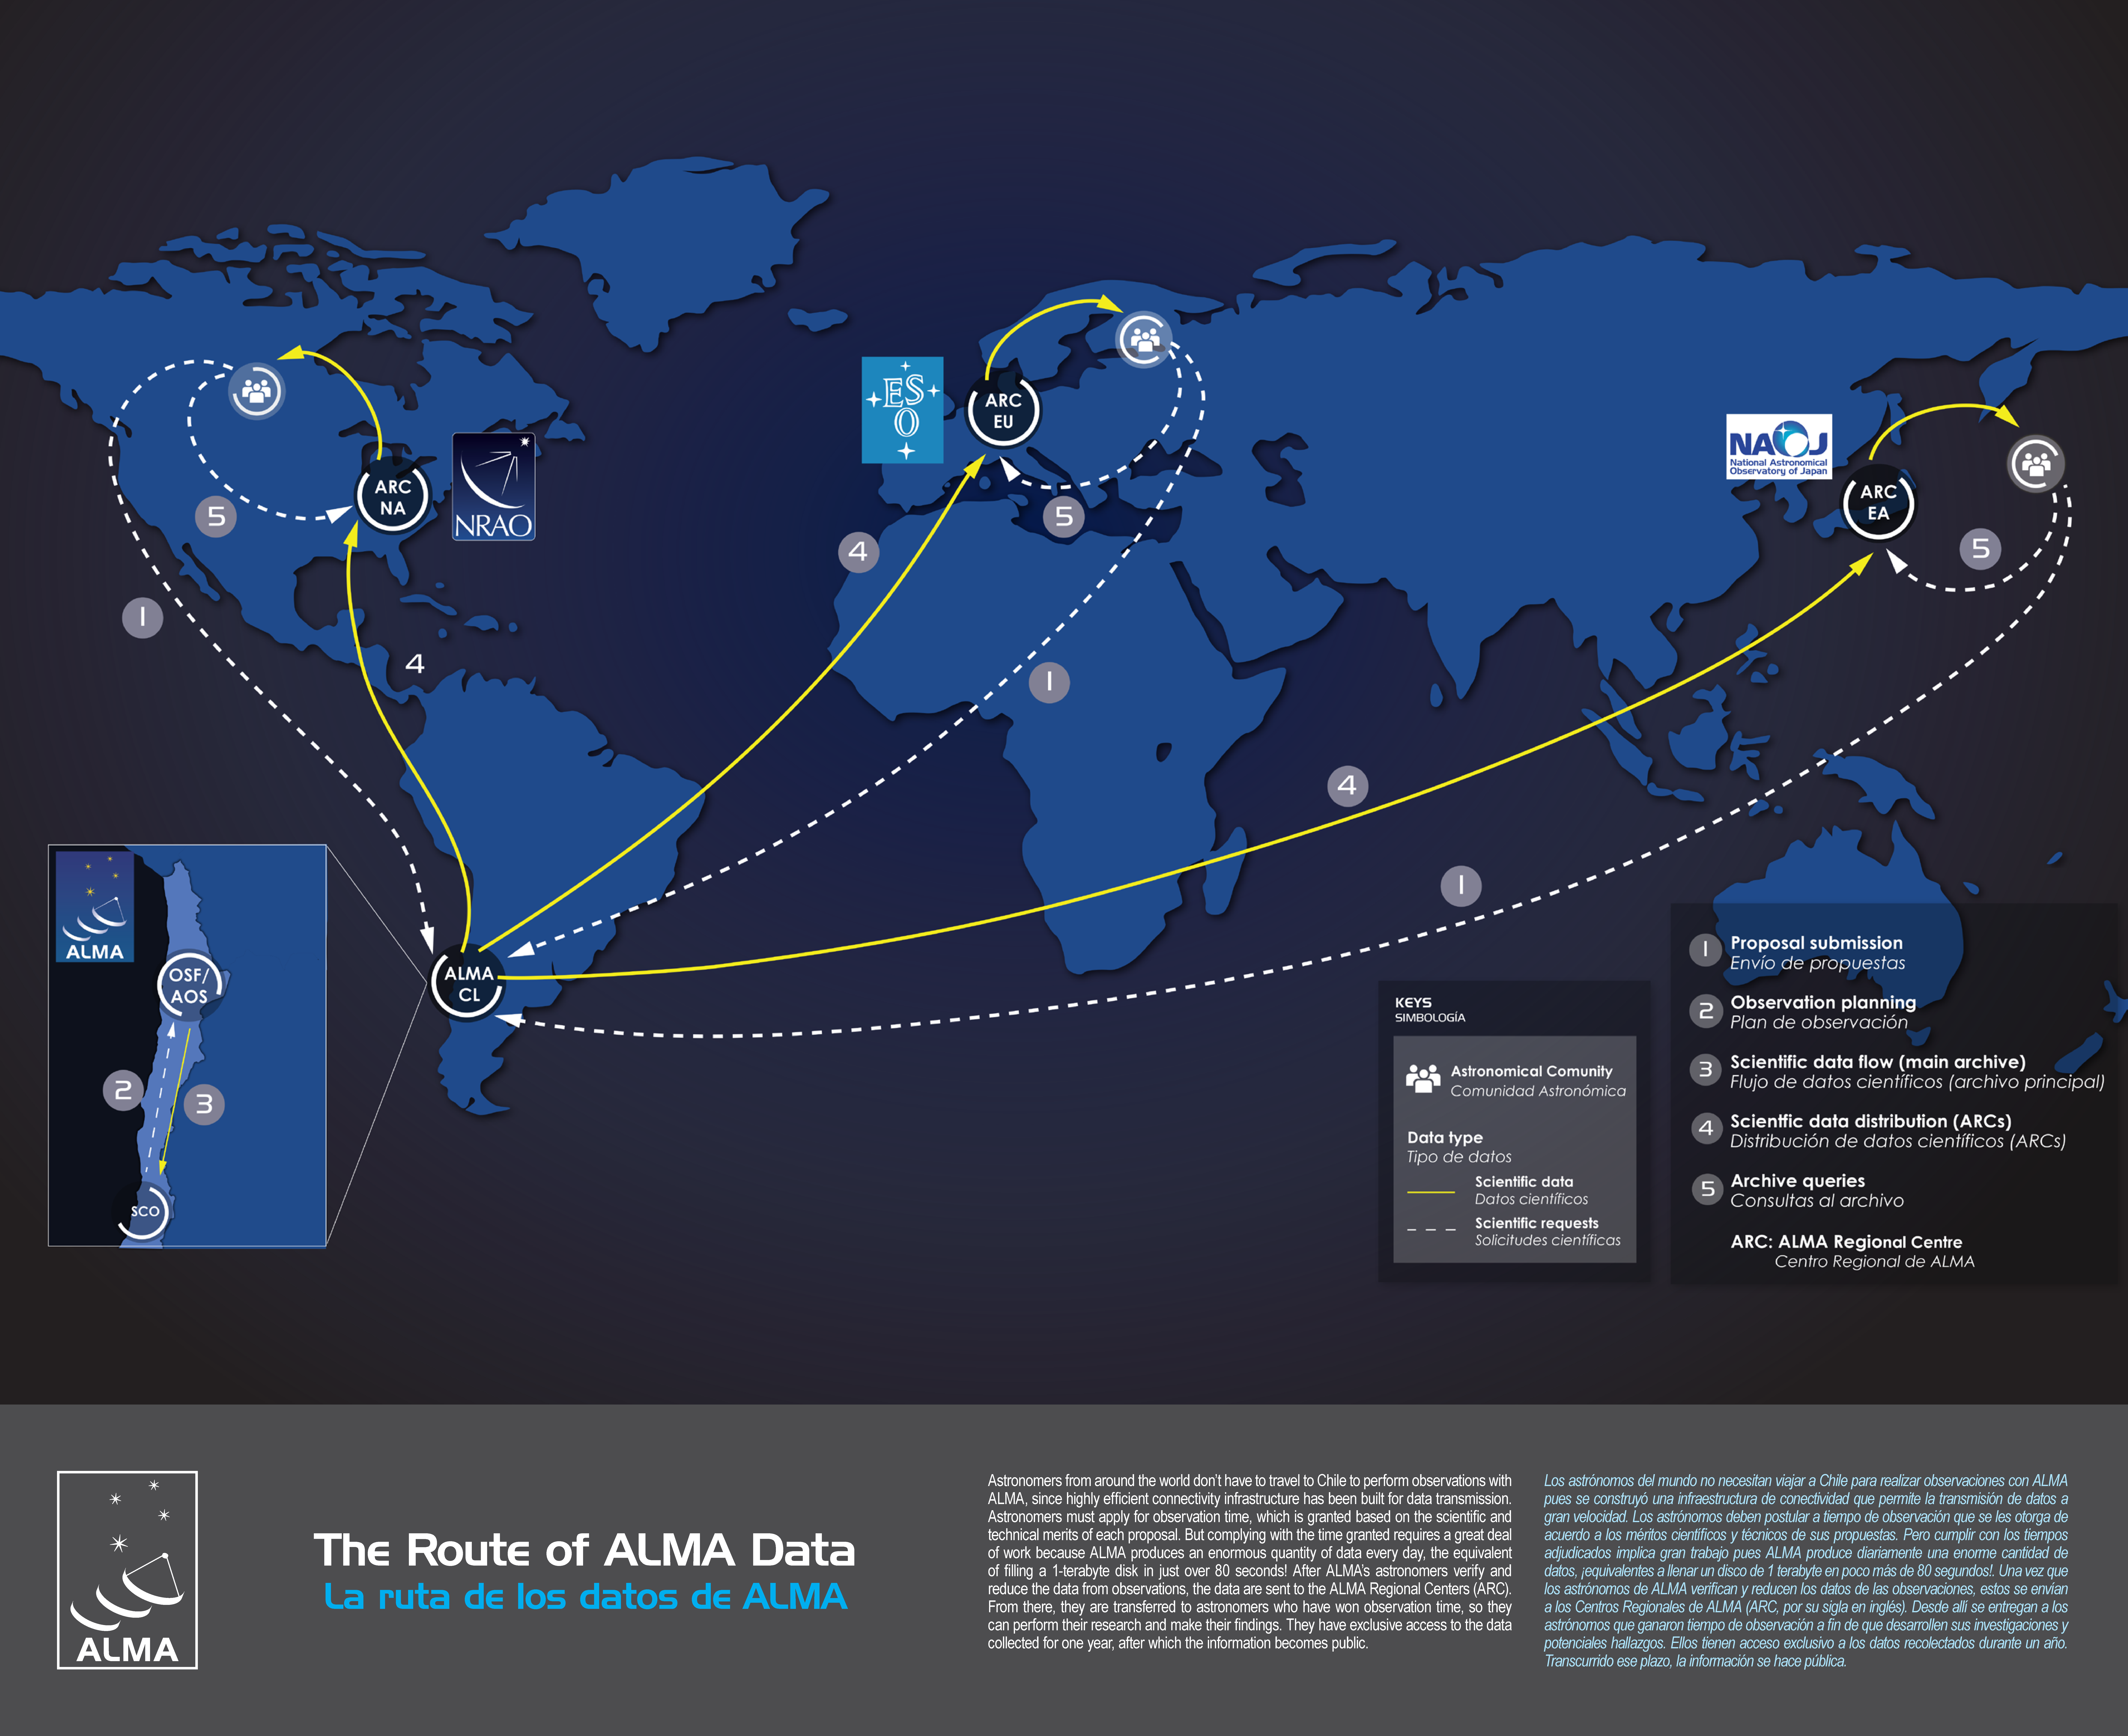 The Route of ALMA Data.